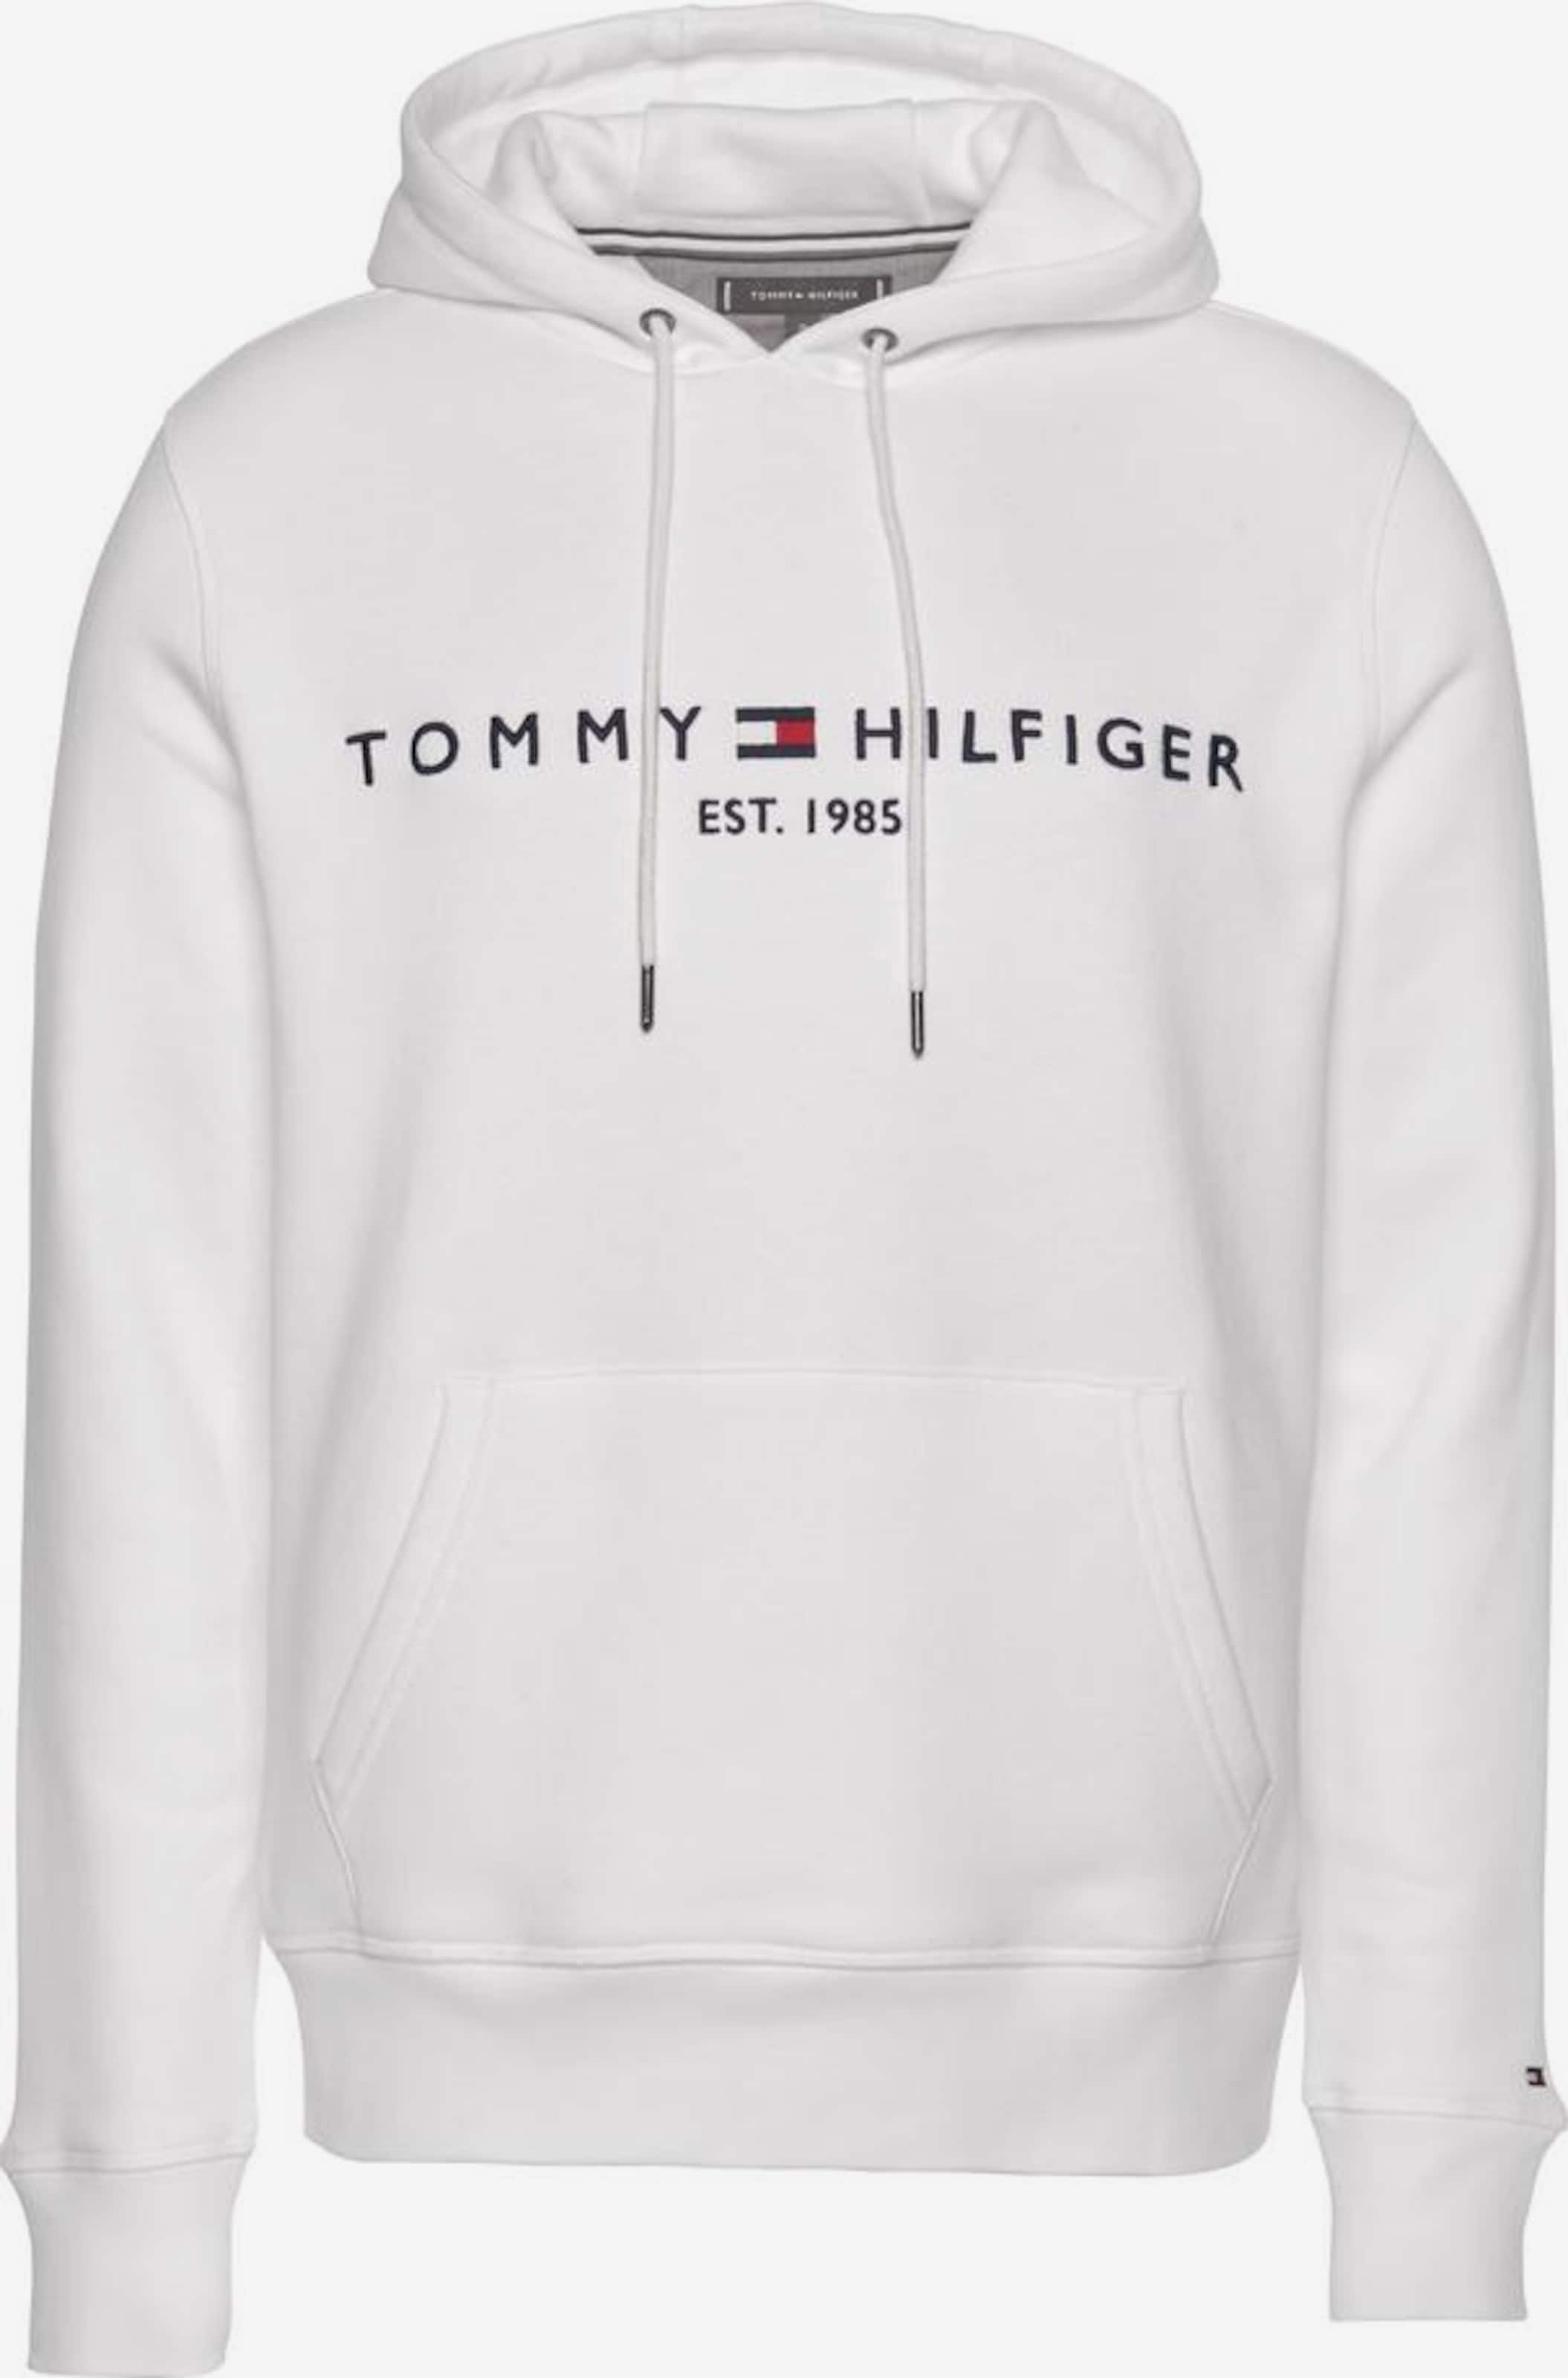 nachtmerrie Spanning Namaak TOMMY HILFIGER Regular fit Sweatshirt in White | ABOUT YOU